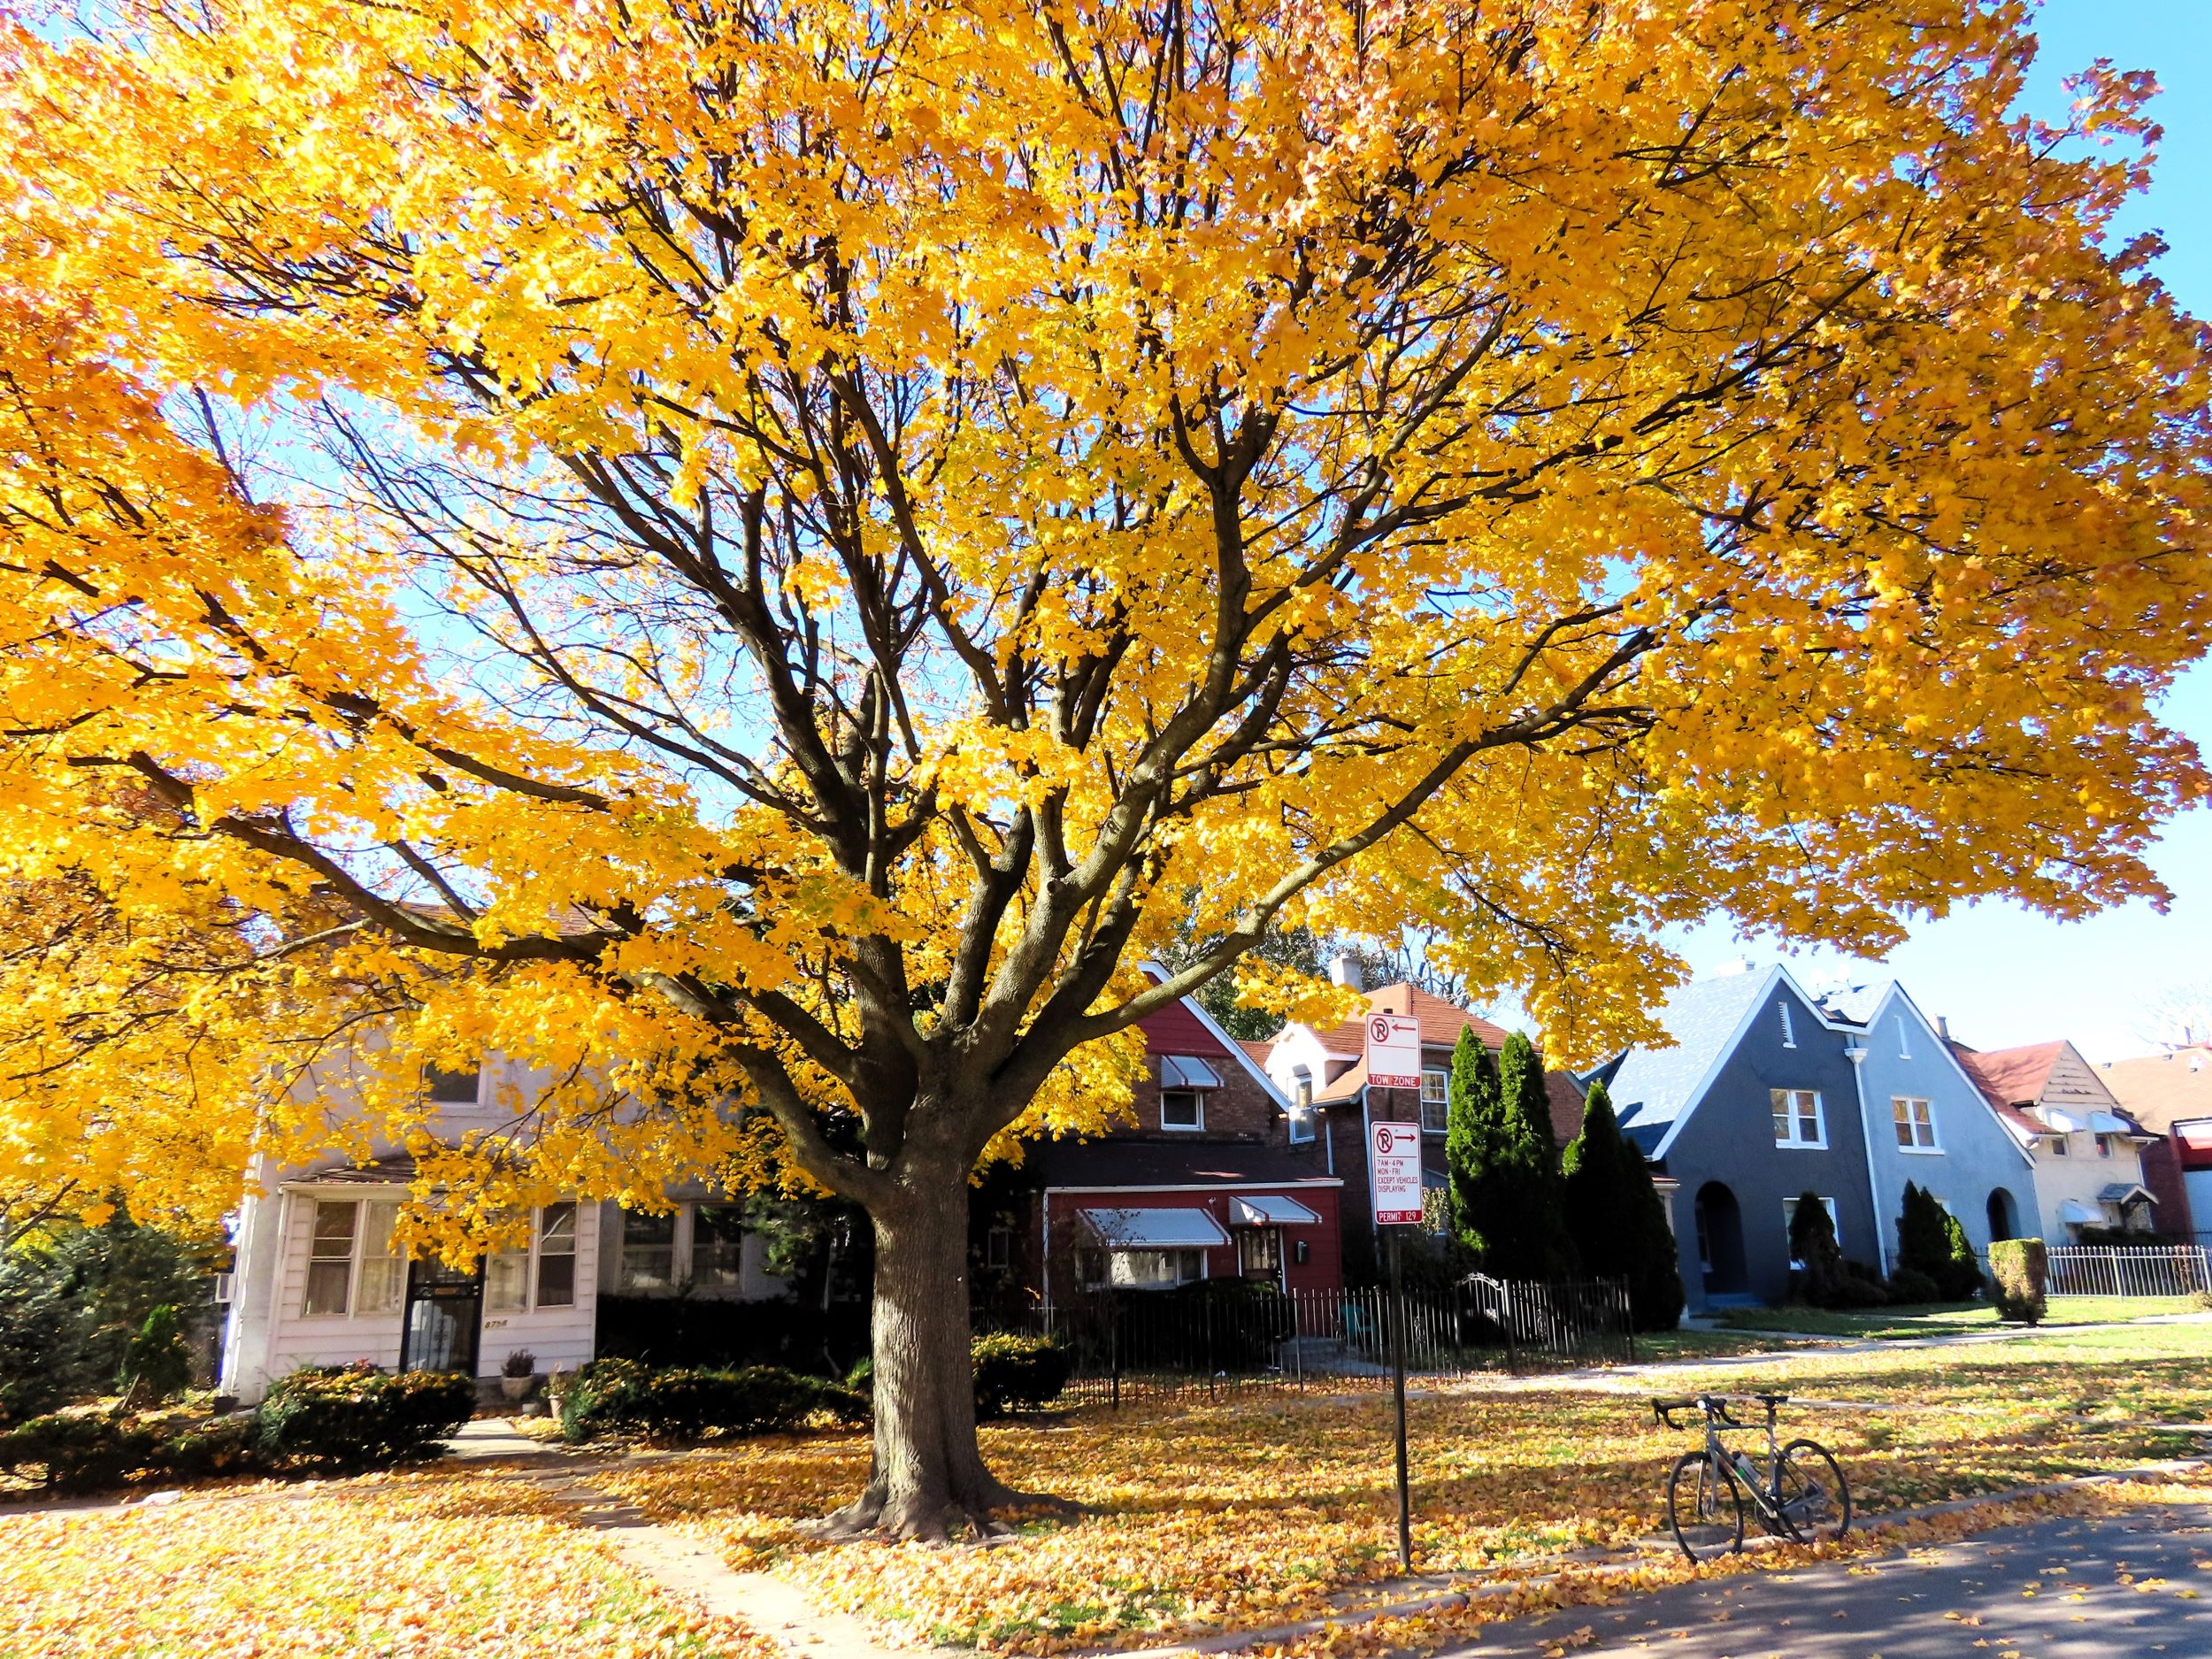 A tour bicycle standing below a bright yellow leaf tree with a wooden duplex and brick single family homes behind.